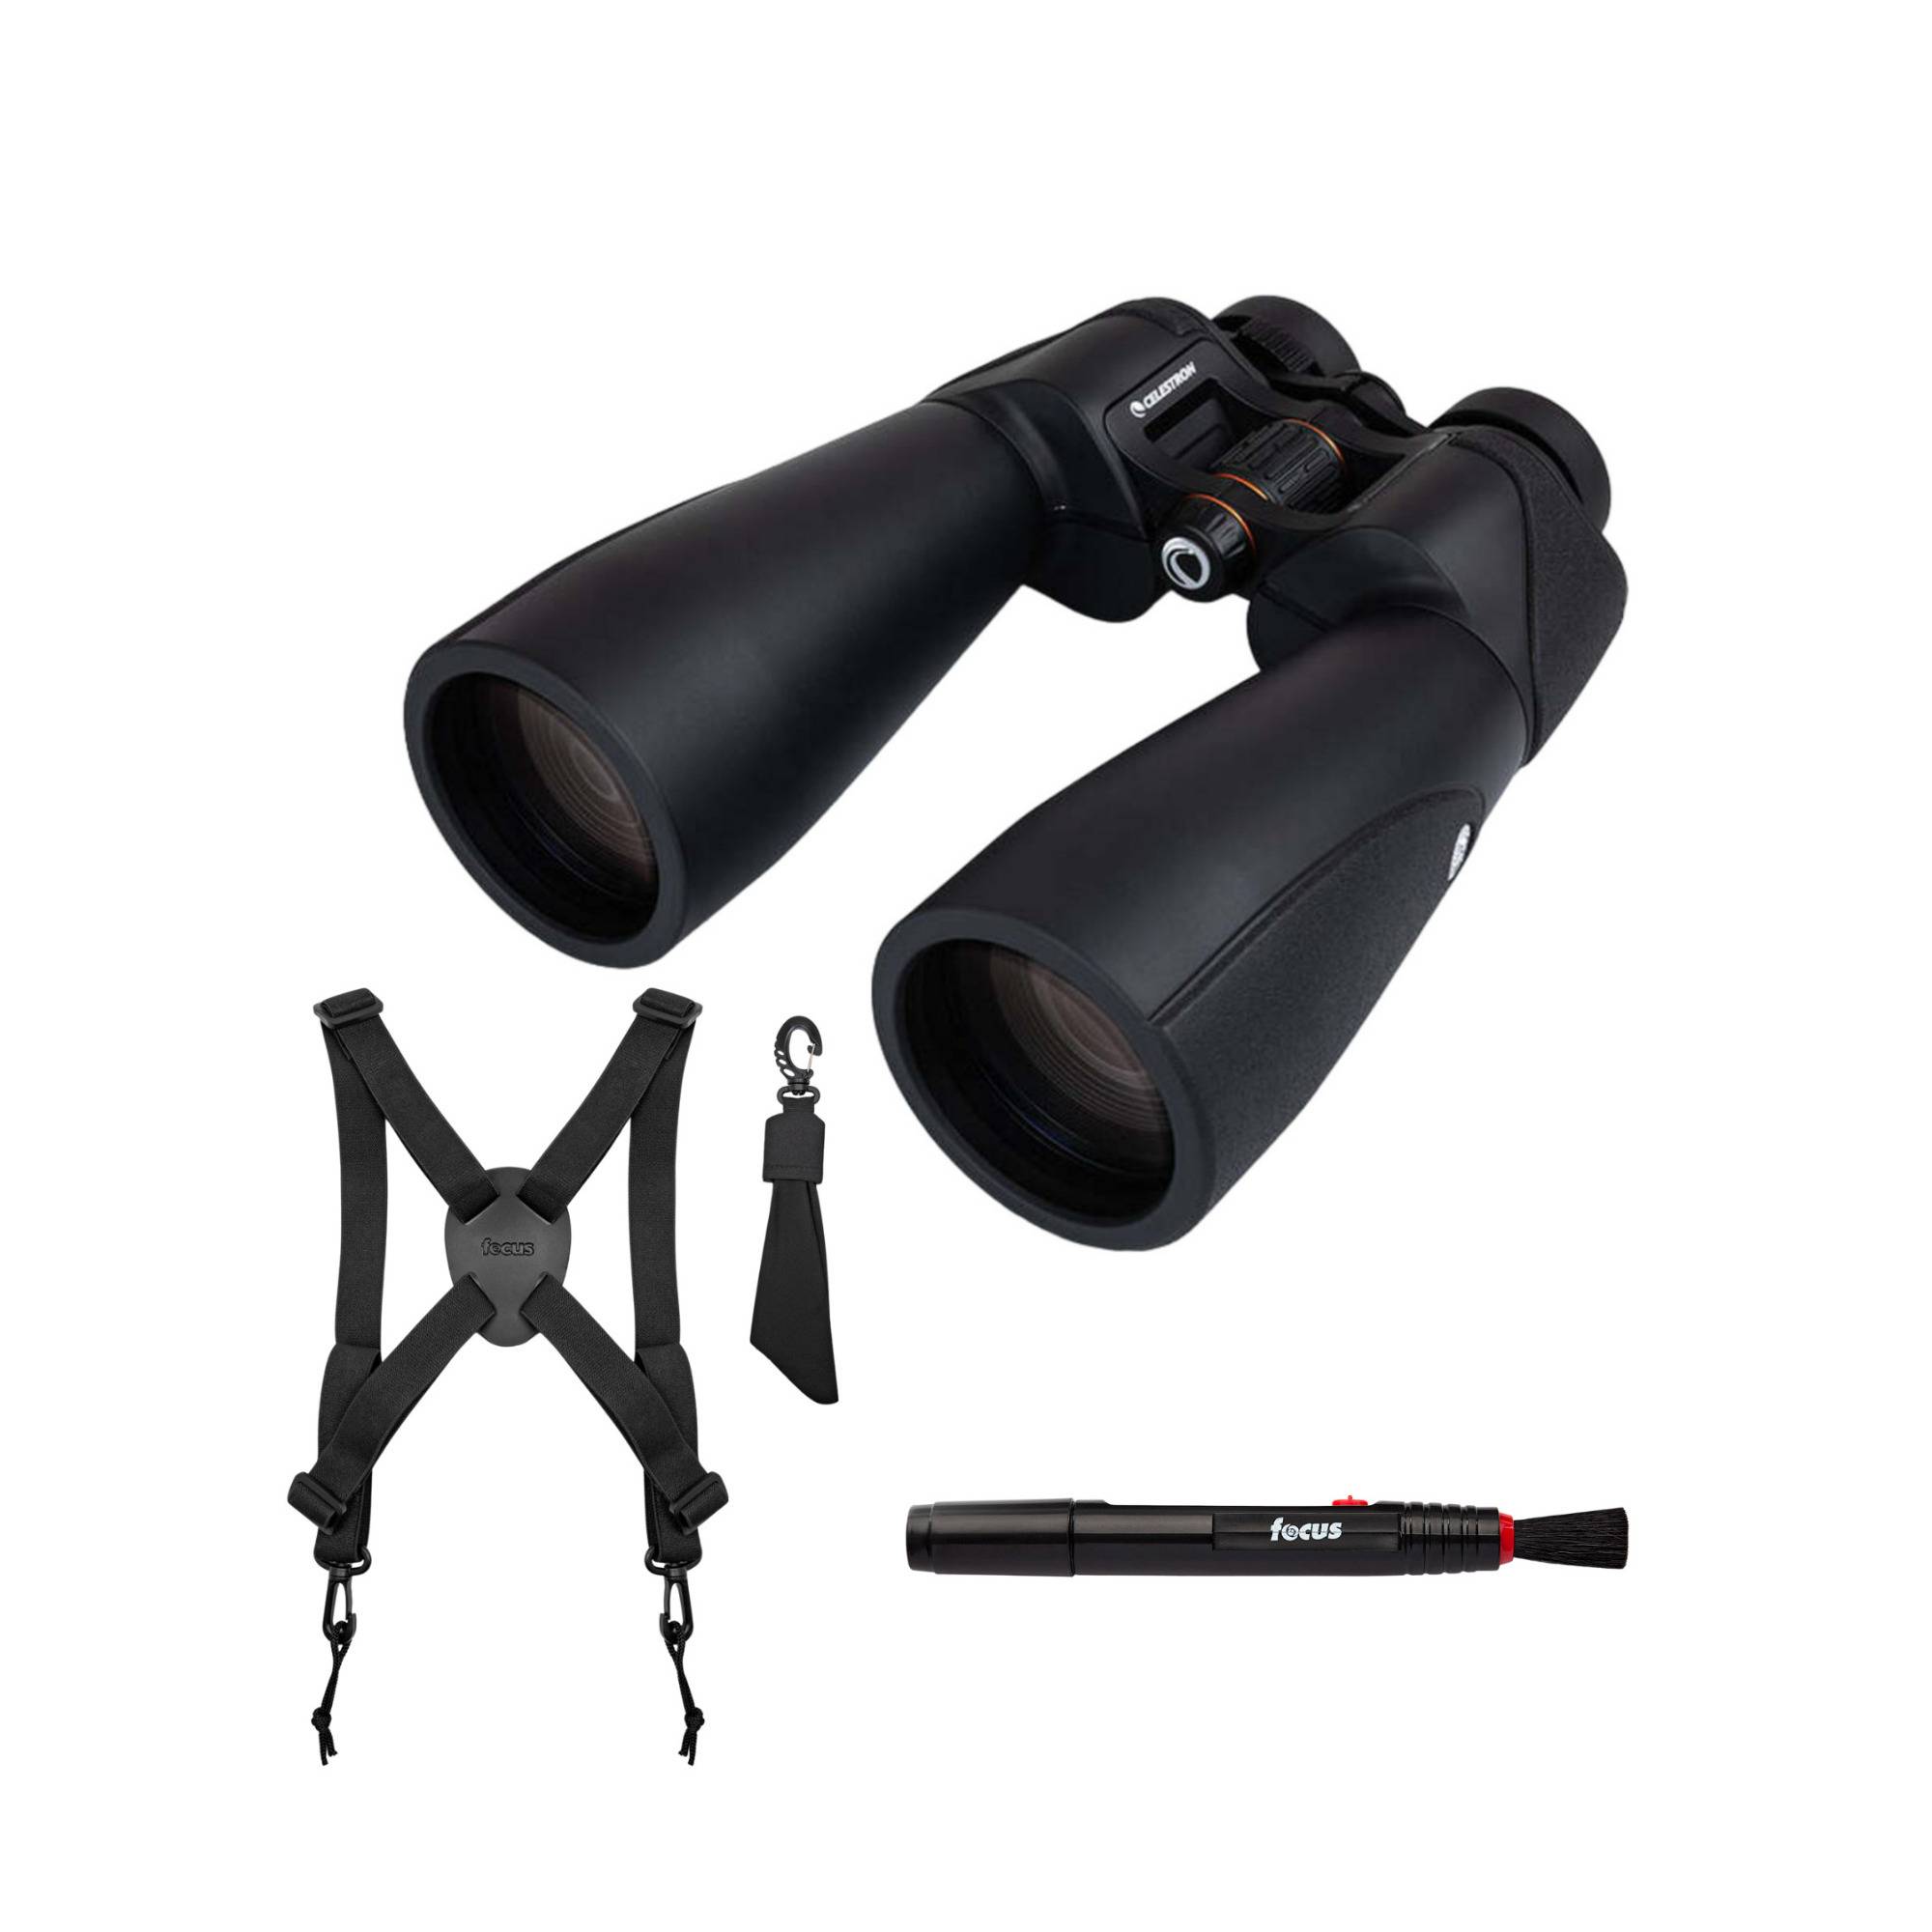 Celestron SkyMaster Pro ED 15x70 Binoculars with Harness and Cleaning Pen